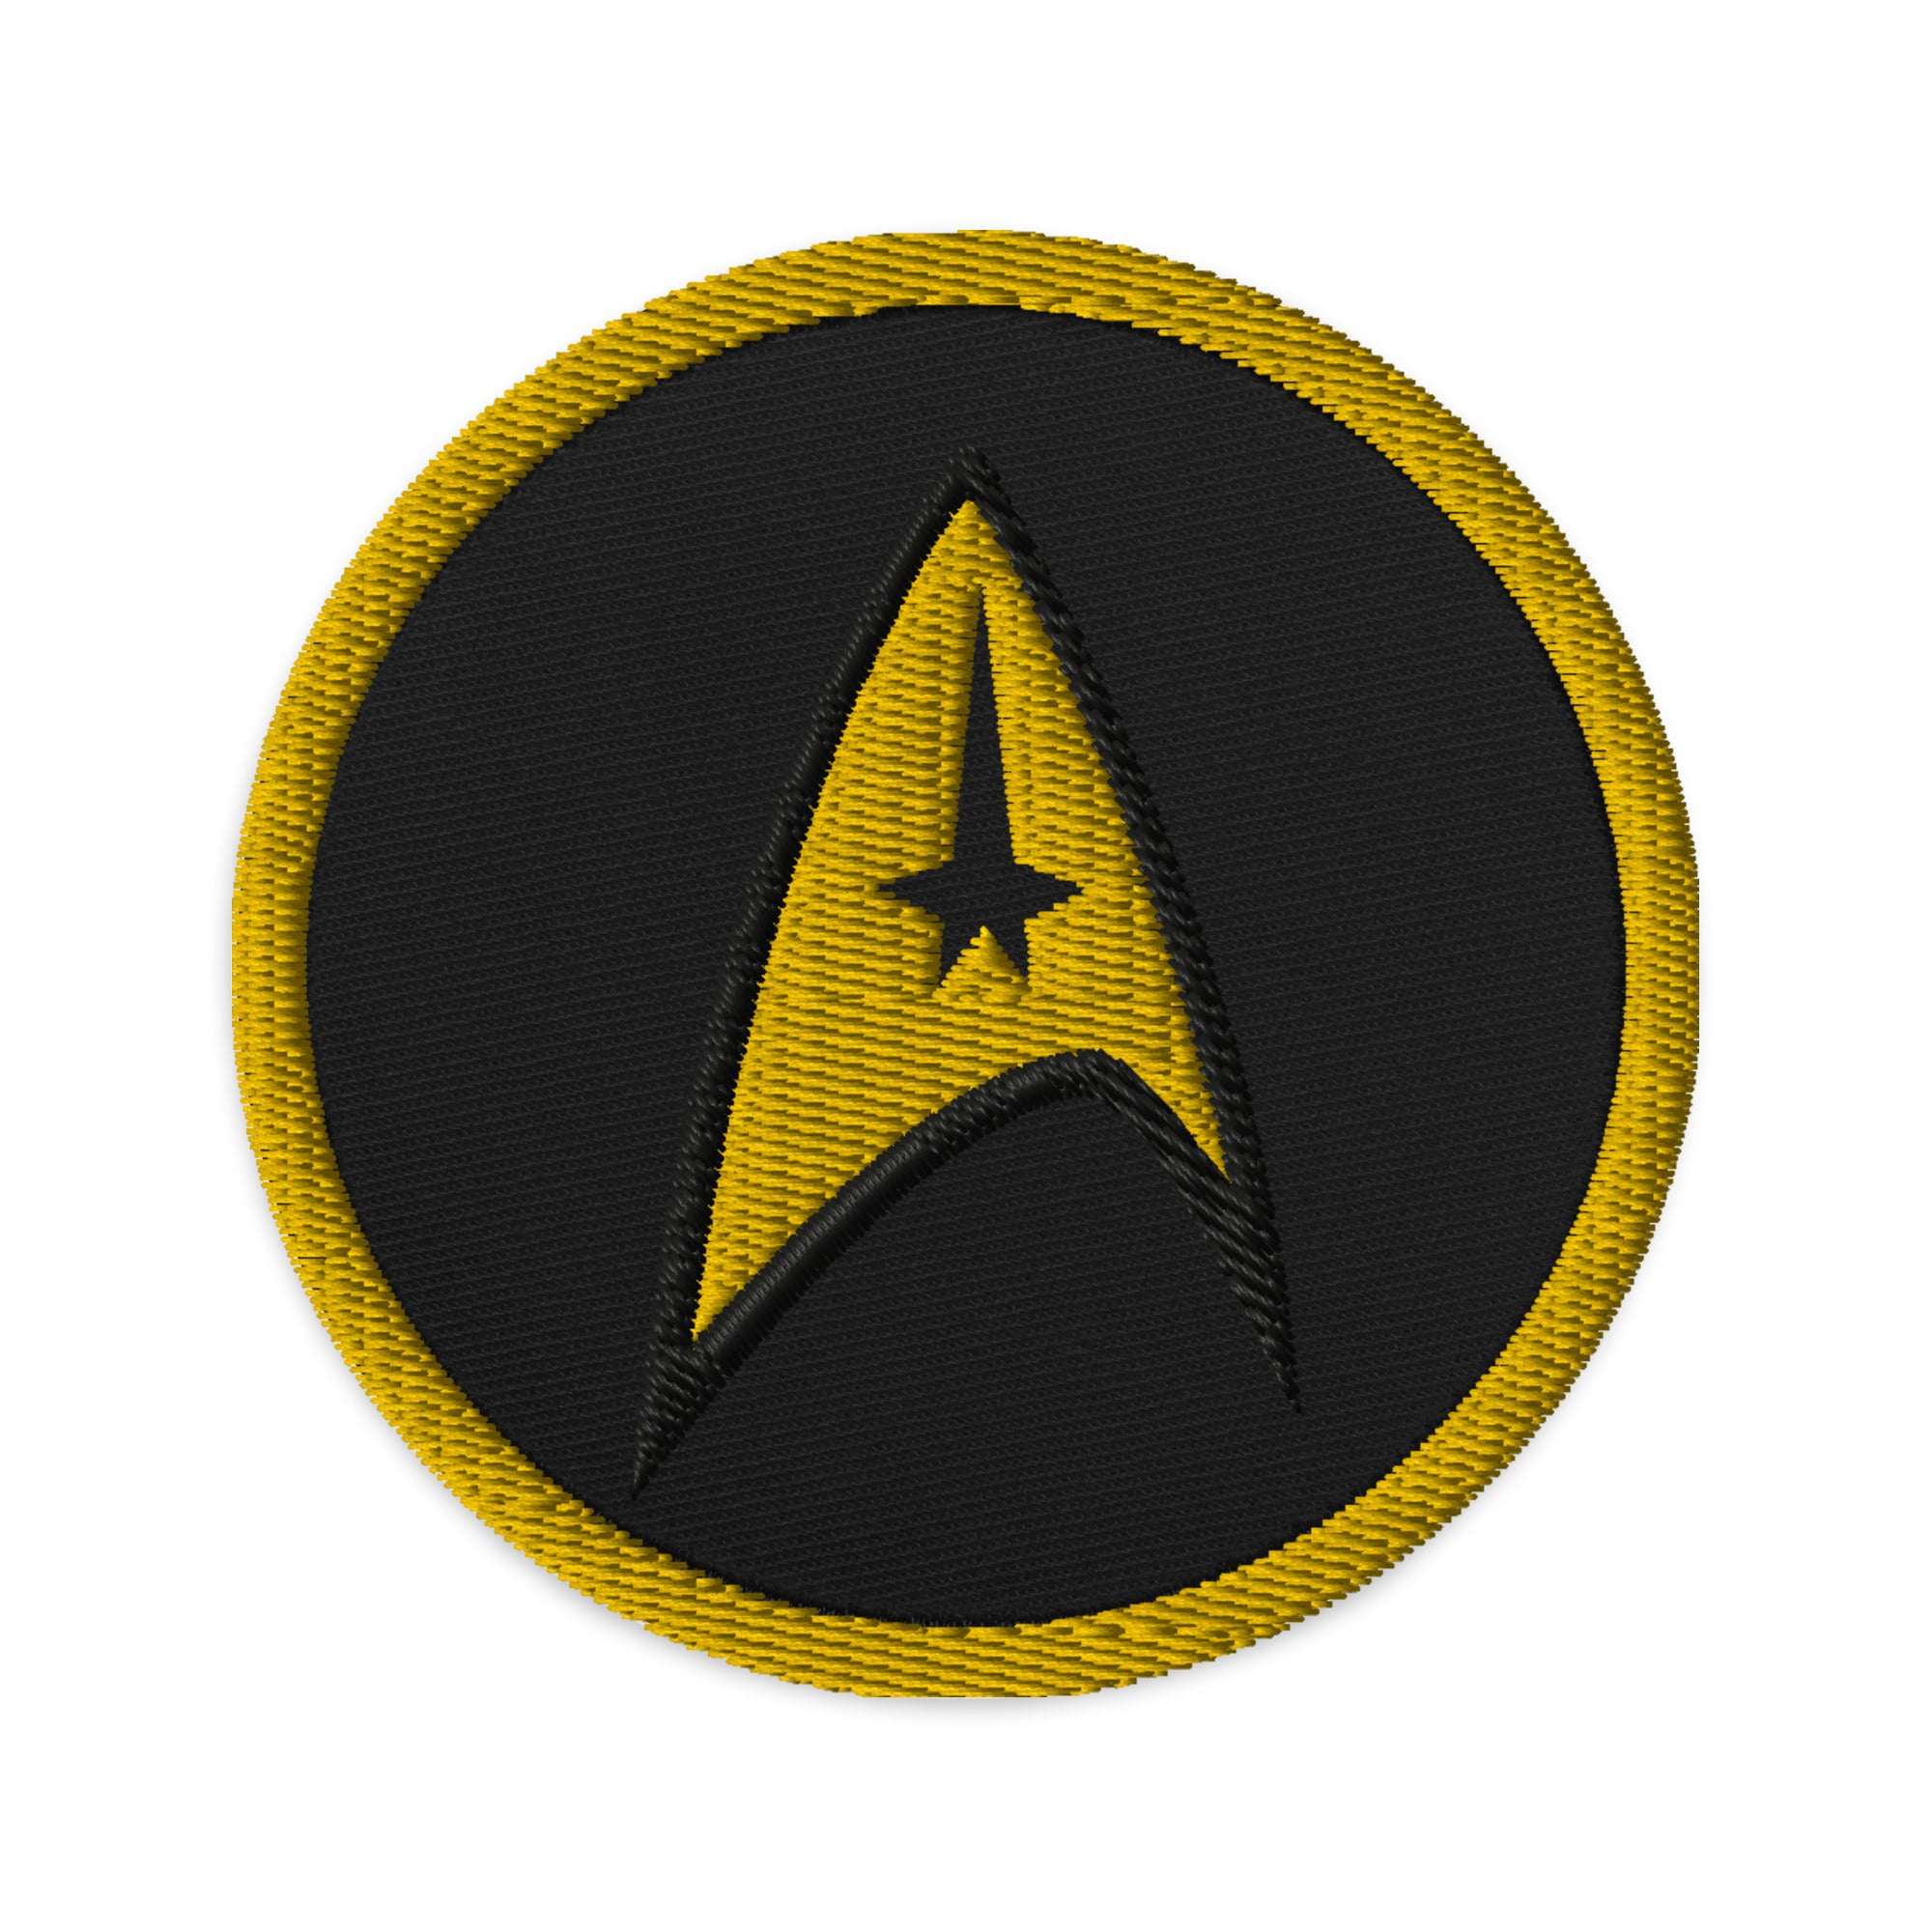 The Delta Insignia Starfleet Badge Embroidered Patch Star Trek Style Cosplay - Edge of Life Designs